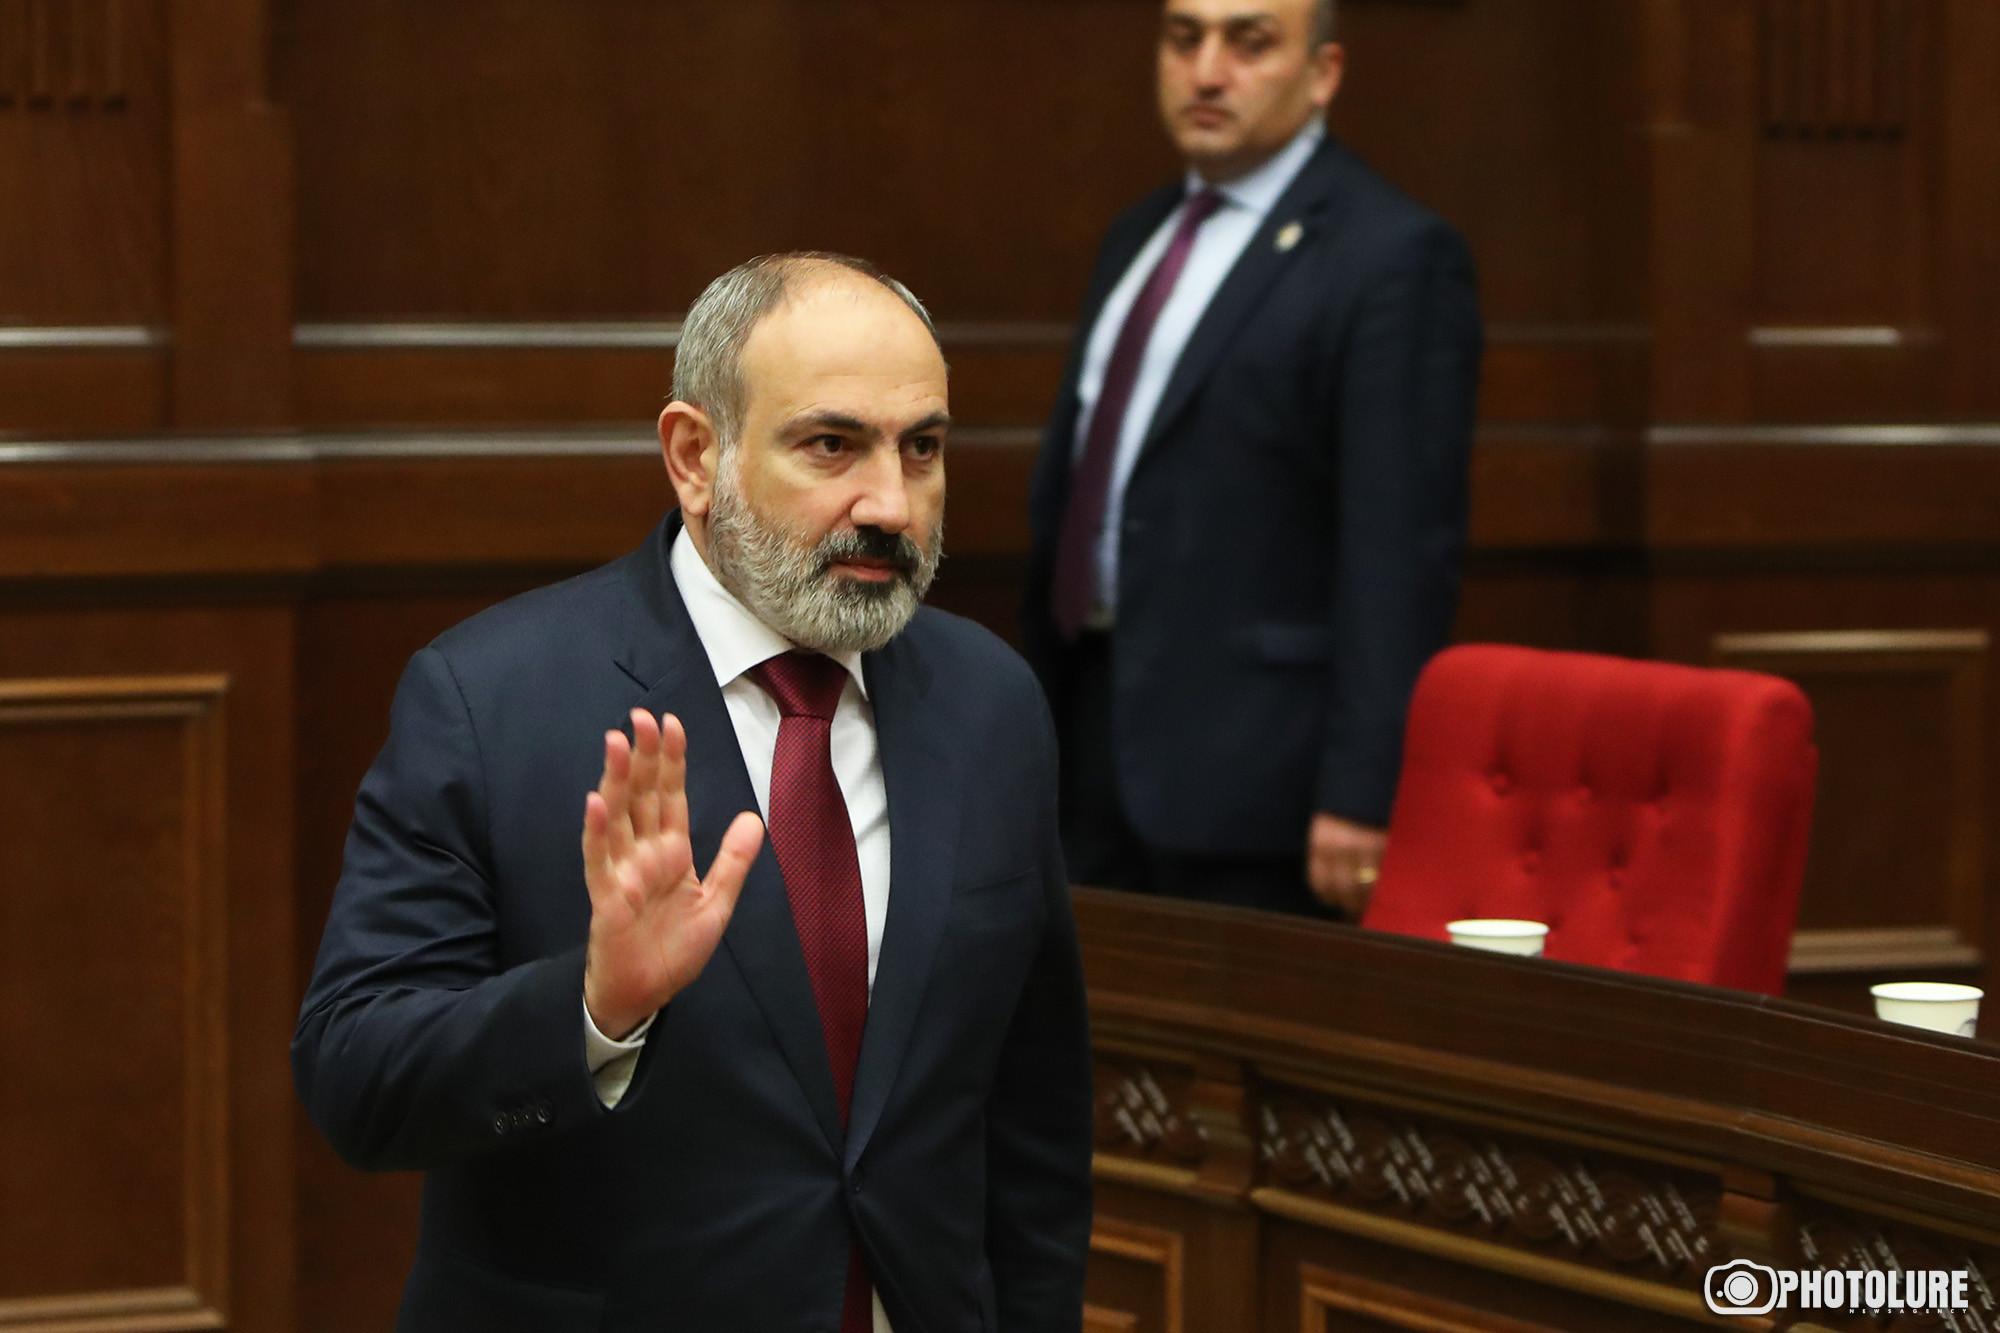 Pashinyan made the promised exposure